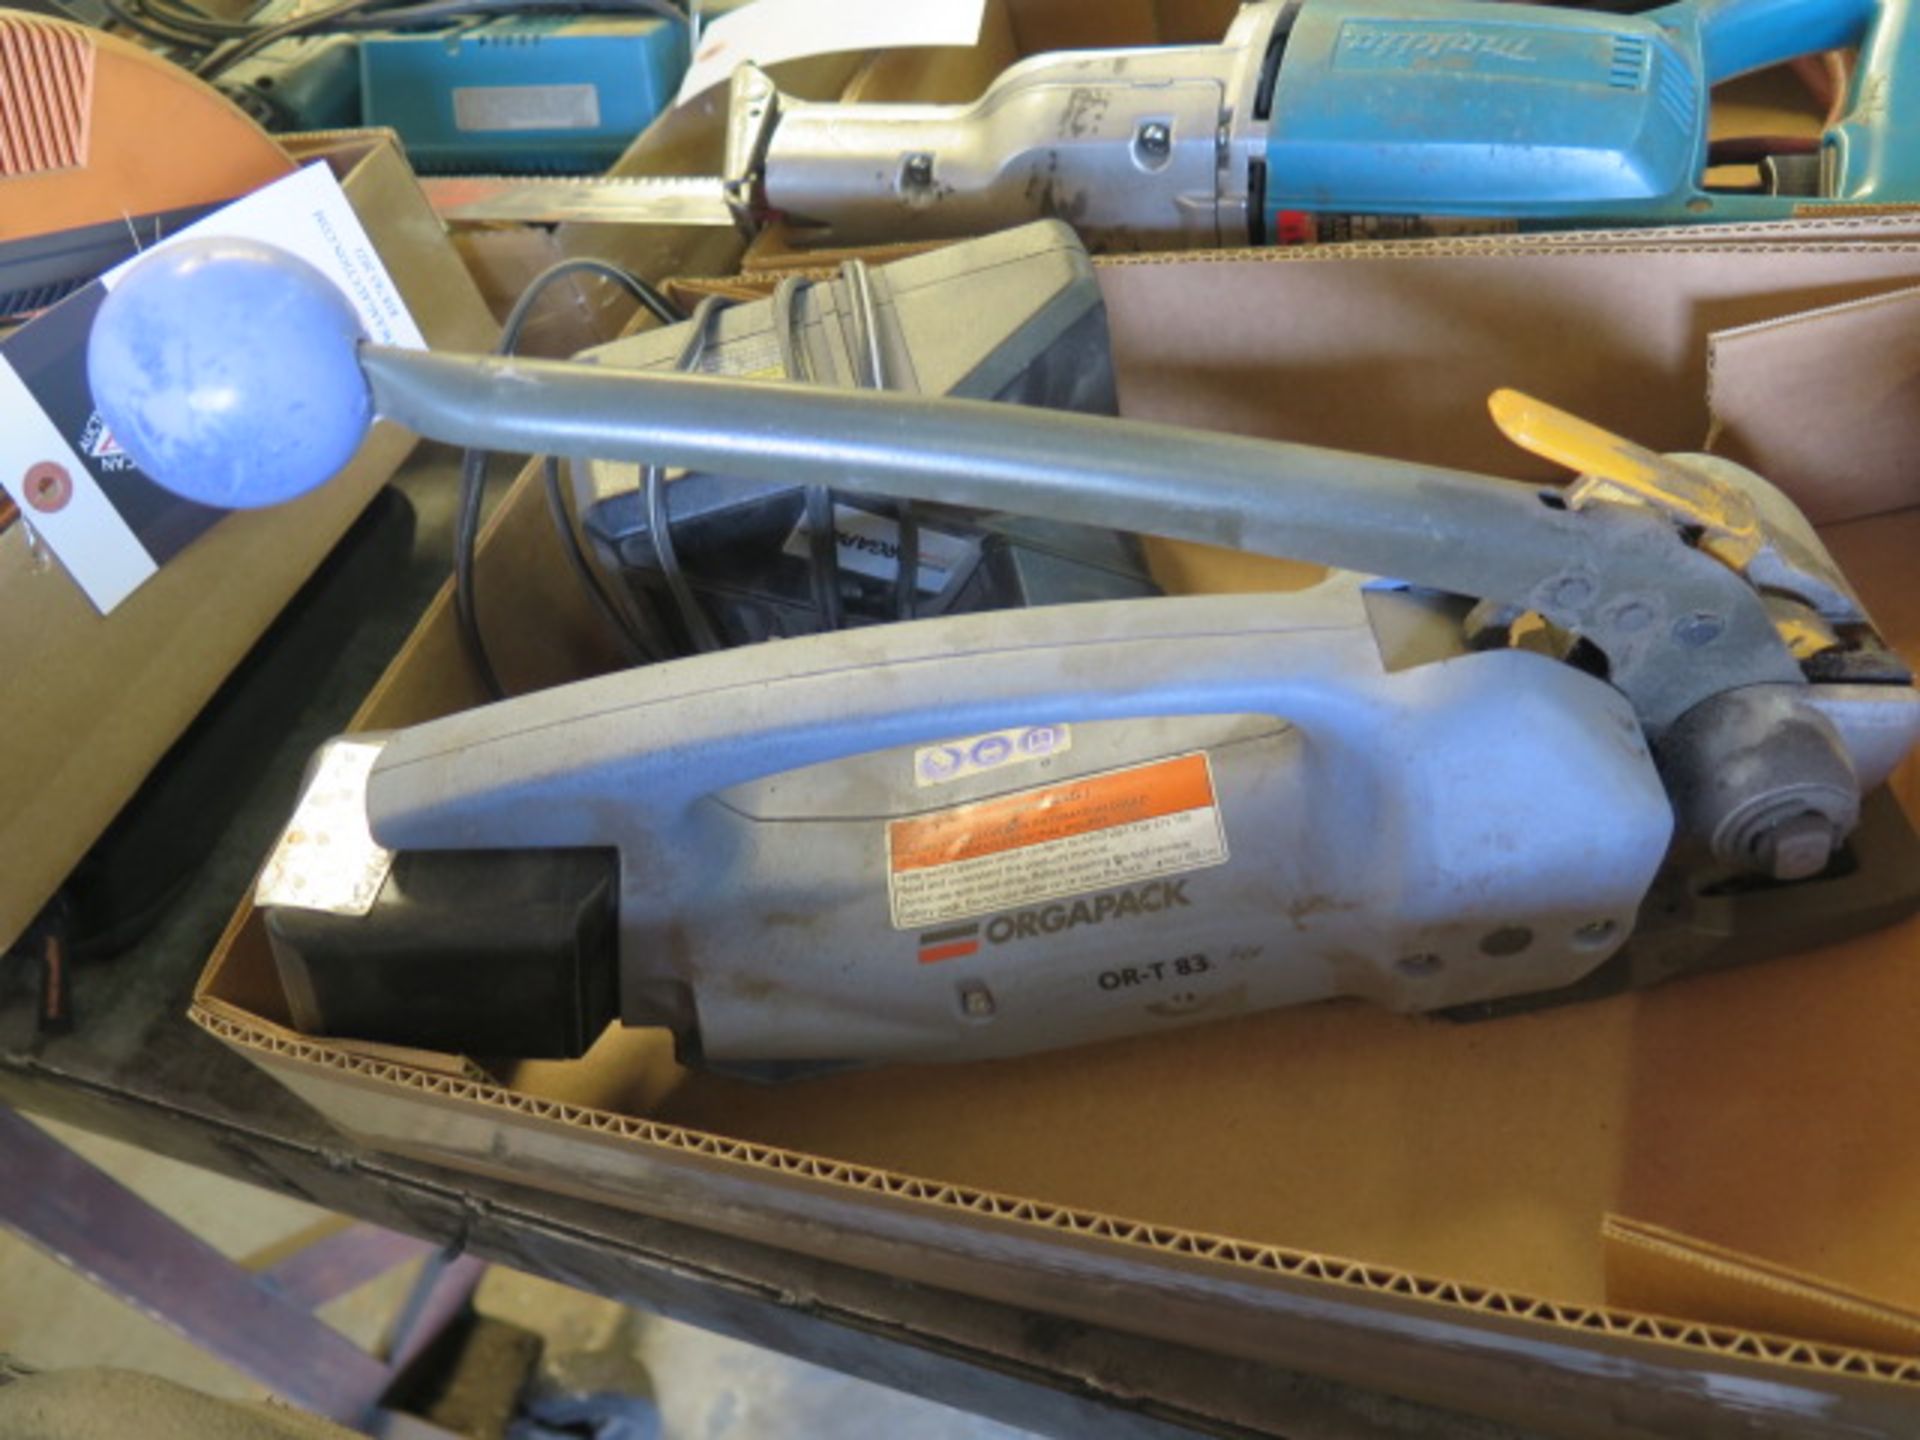 Orgapack OR-T-83 Cordless Strapping Tool w/ Batteries and Charger (SOLD AS-IS - NO WARRANTY) - Image 2 of 5